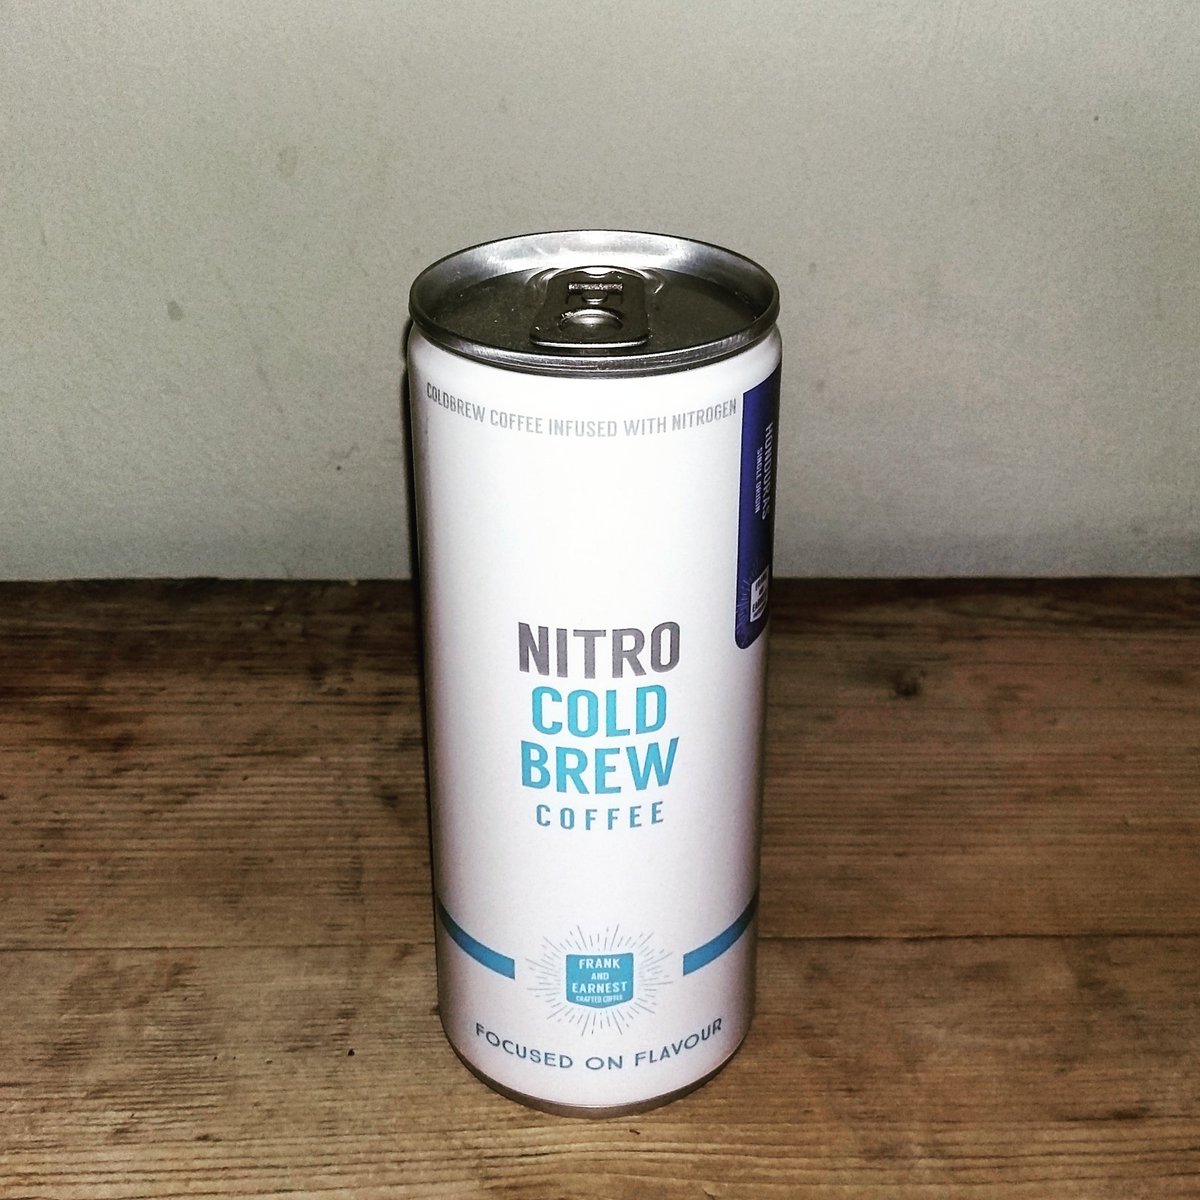 Loving coffee (nearly) as much as I love beer I'm looking forward to trying this Nitro Cold Brew Coffee by @FandEcoffee.